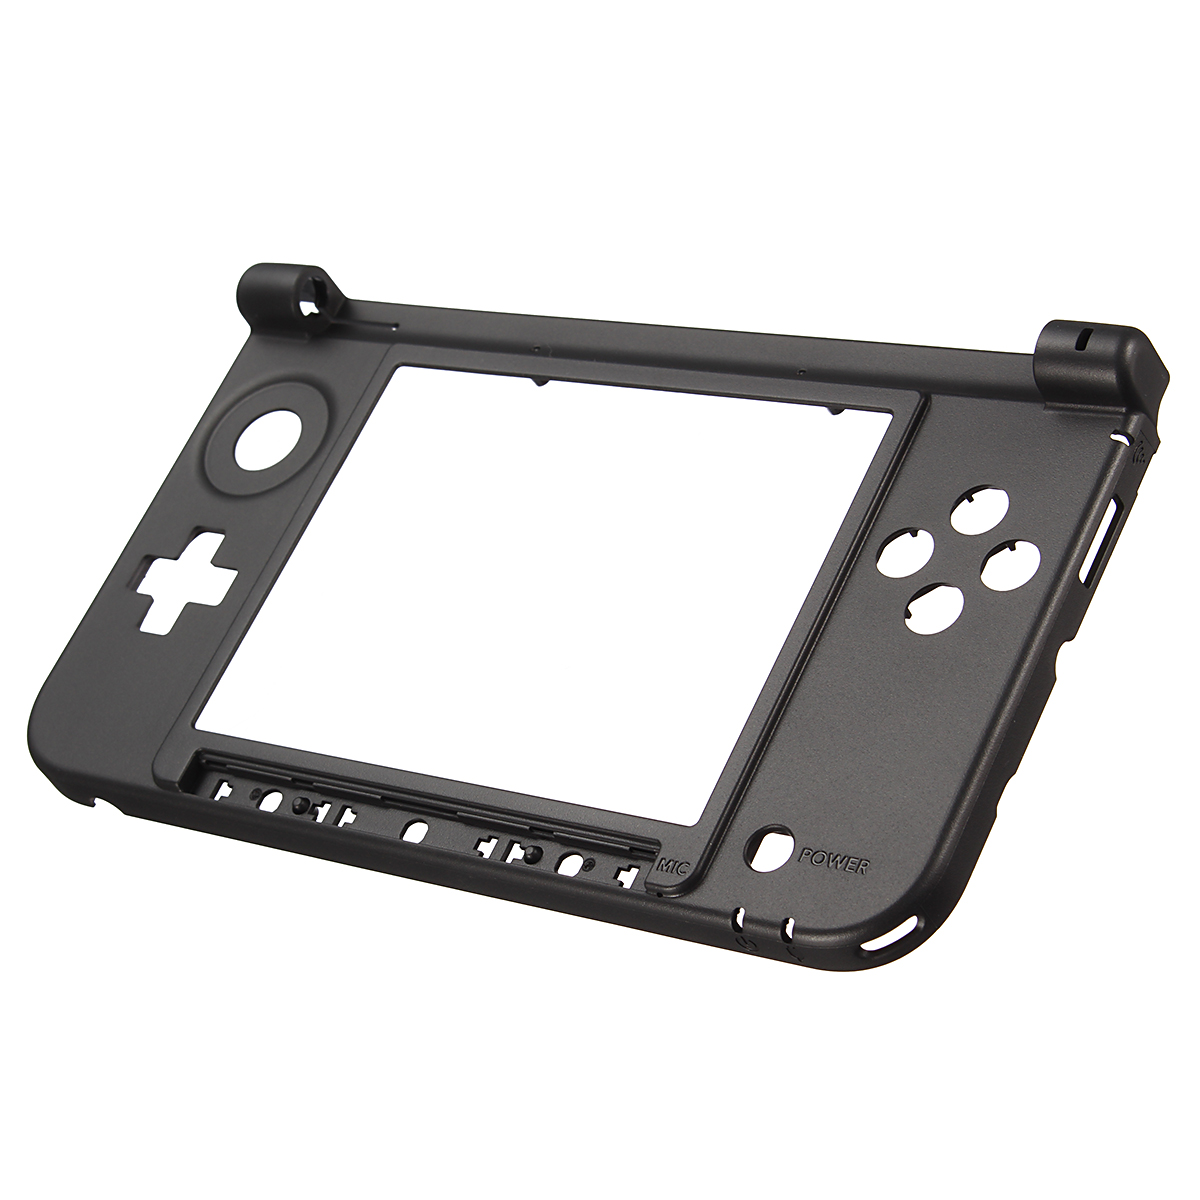 Replacement Bottom Middle Frame Housing Shell Cover Case for Nintendo 3DS XL 3DS LL Game Console 33